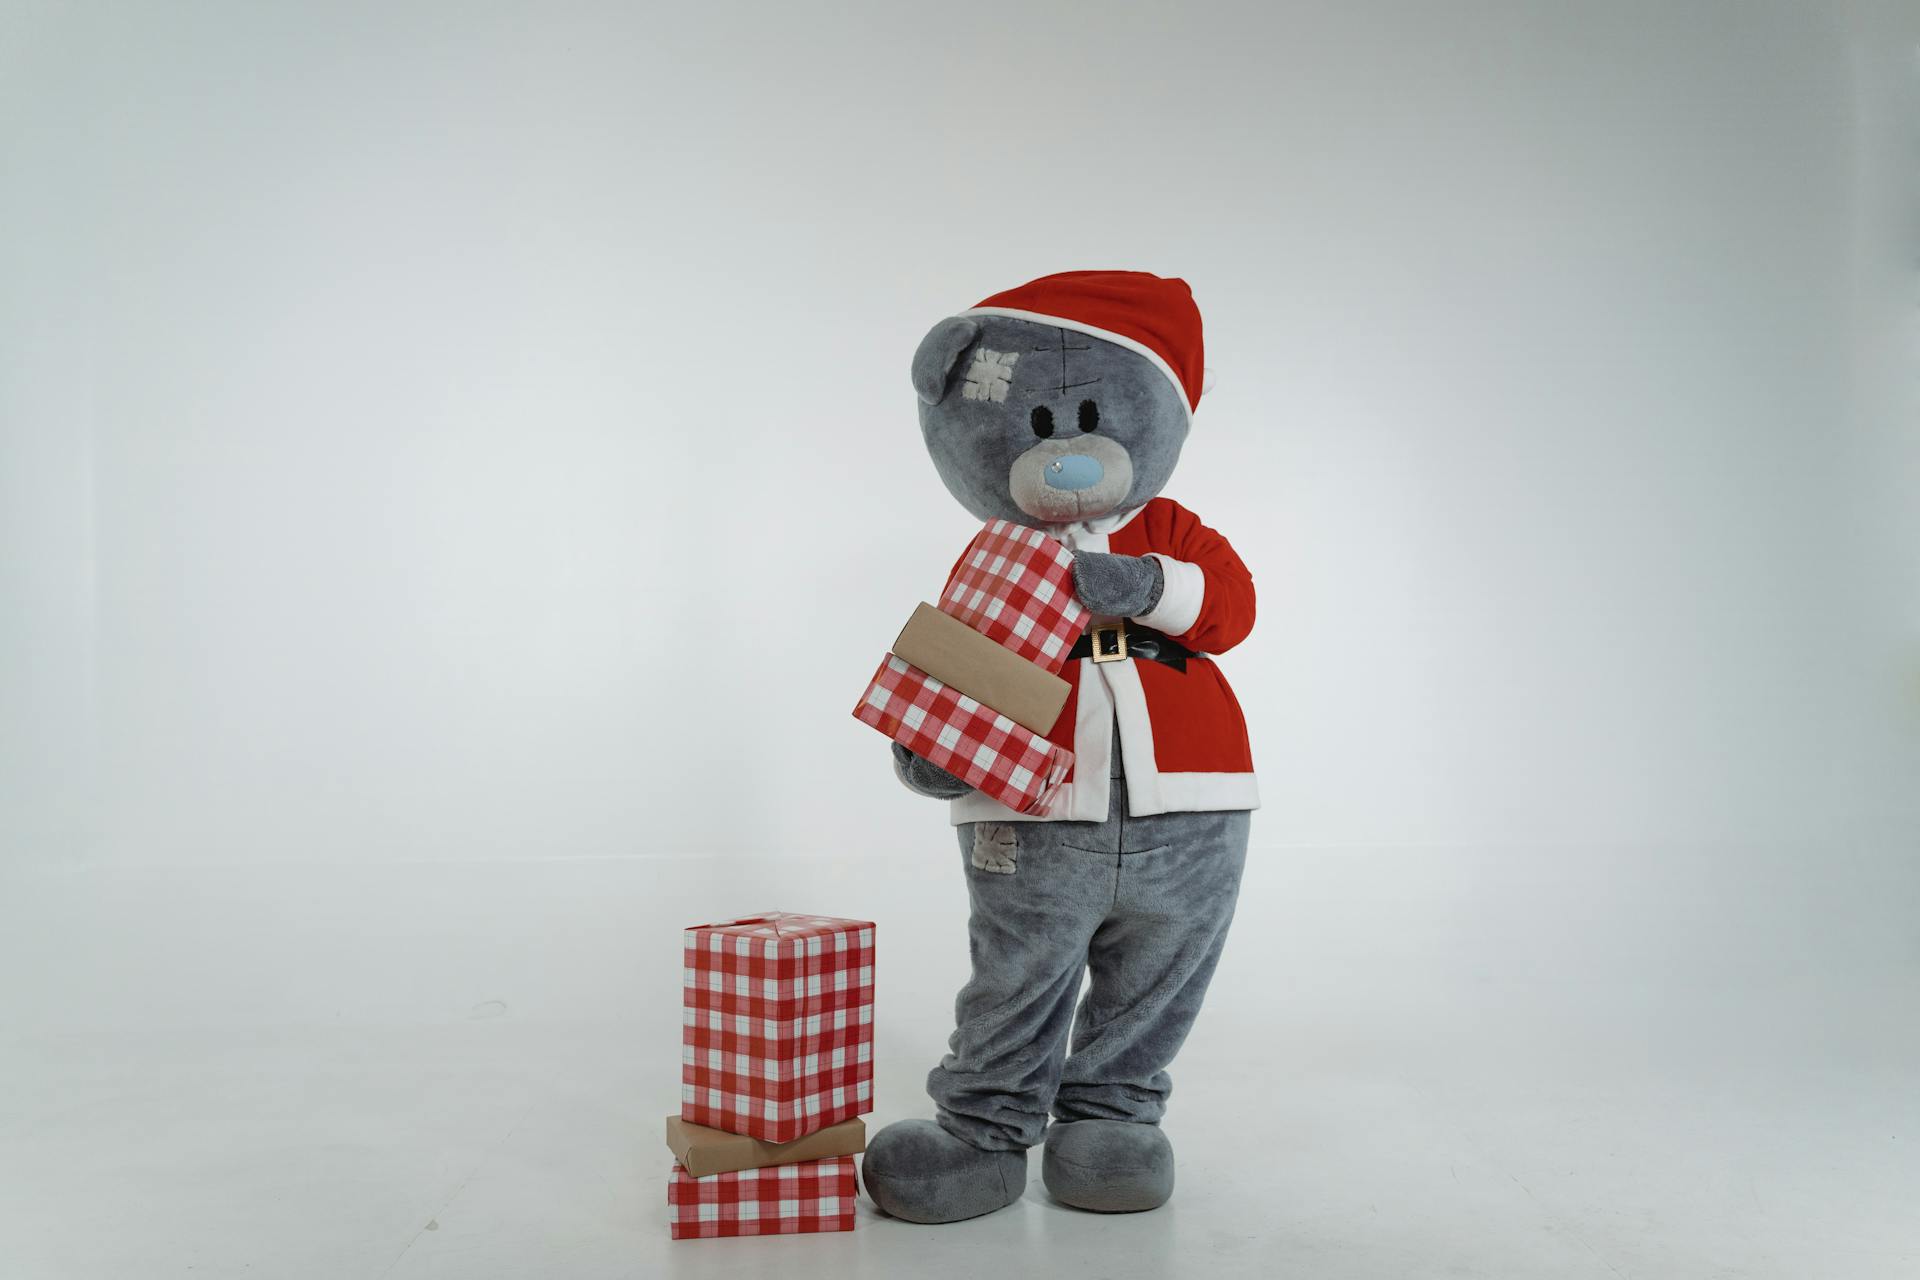 A Teddy Bear Mascot in Santa Claus Costume Holding Christmas Presents